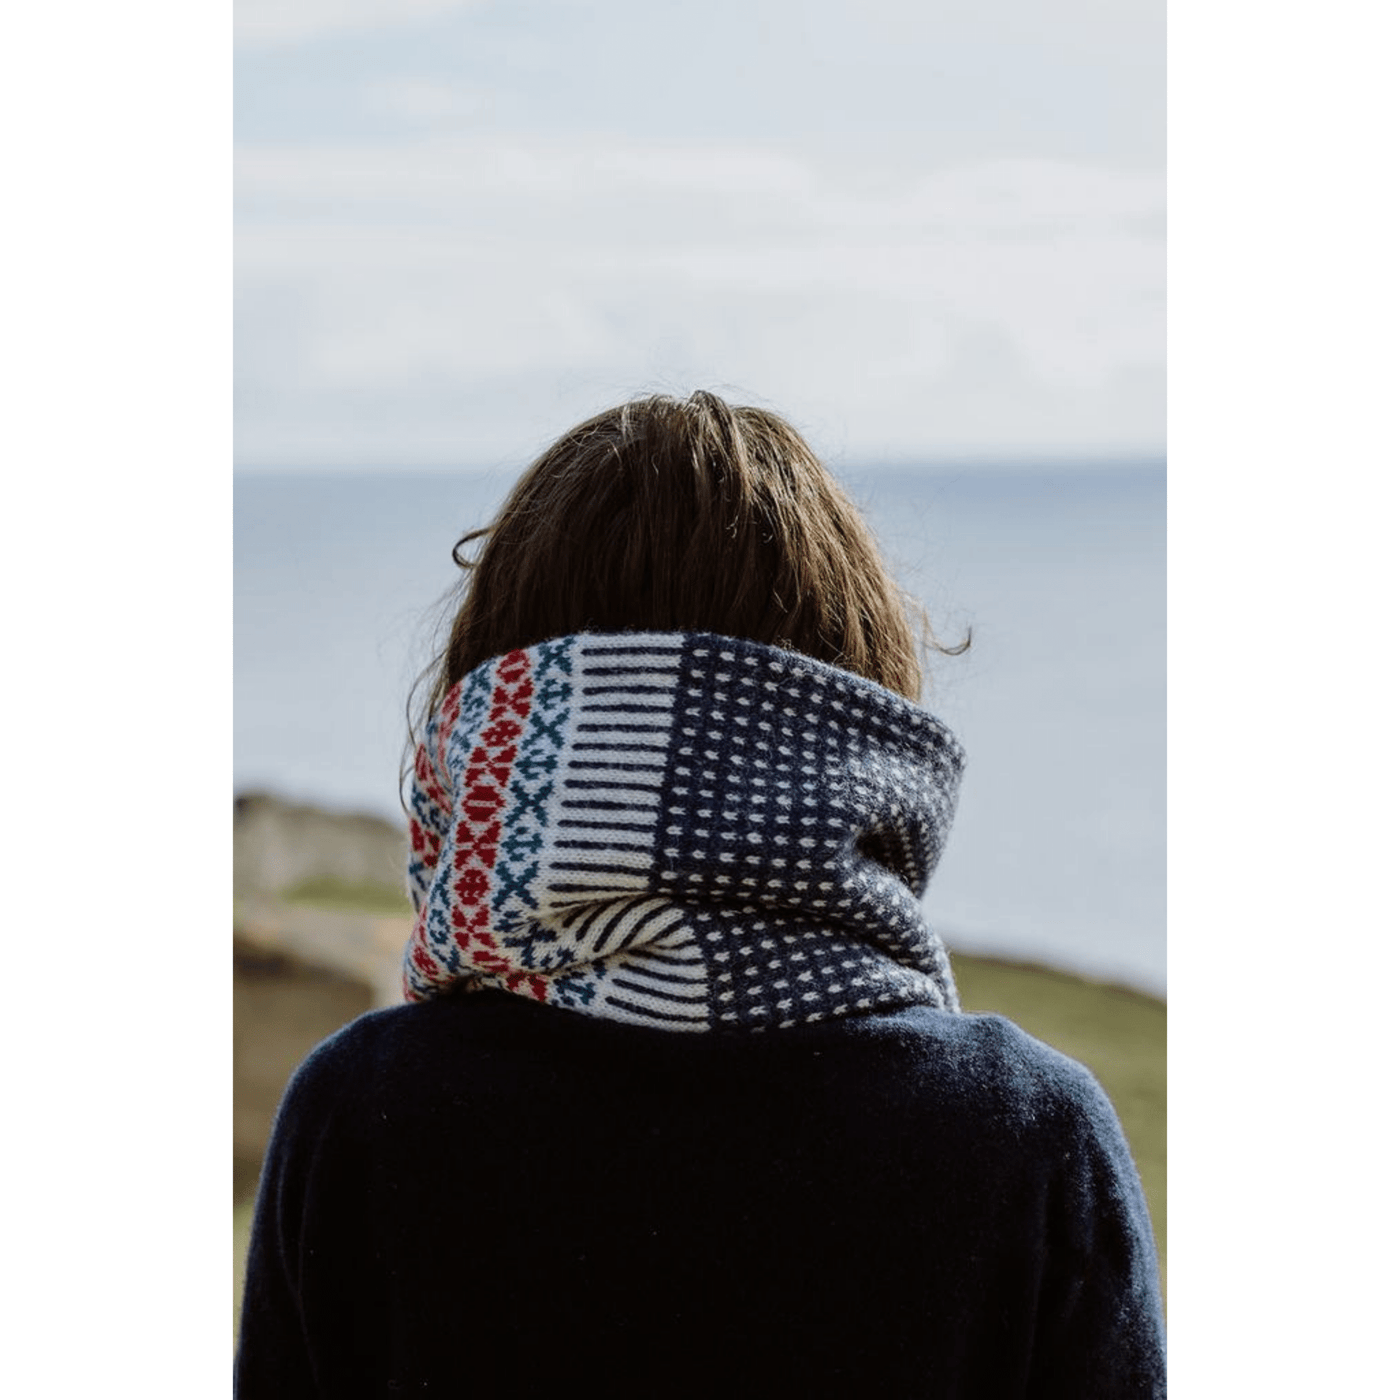 The Woolly Thistle image from Shetland Wool Week Annual 2021 featuring a woman looking at the ocean wearing knitted scarf 